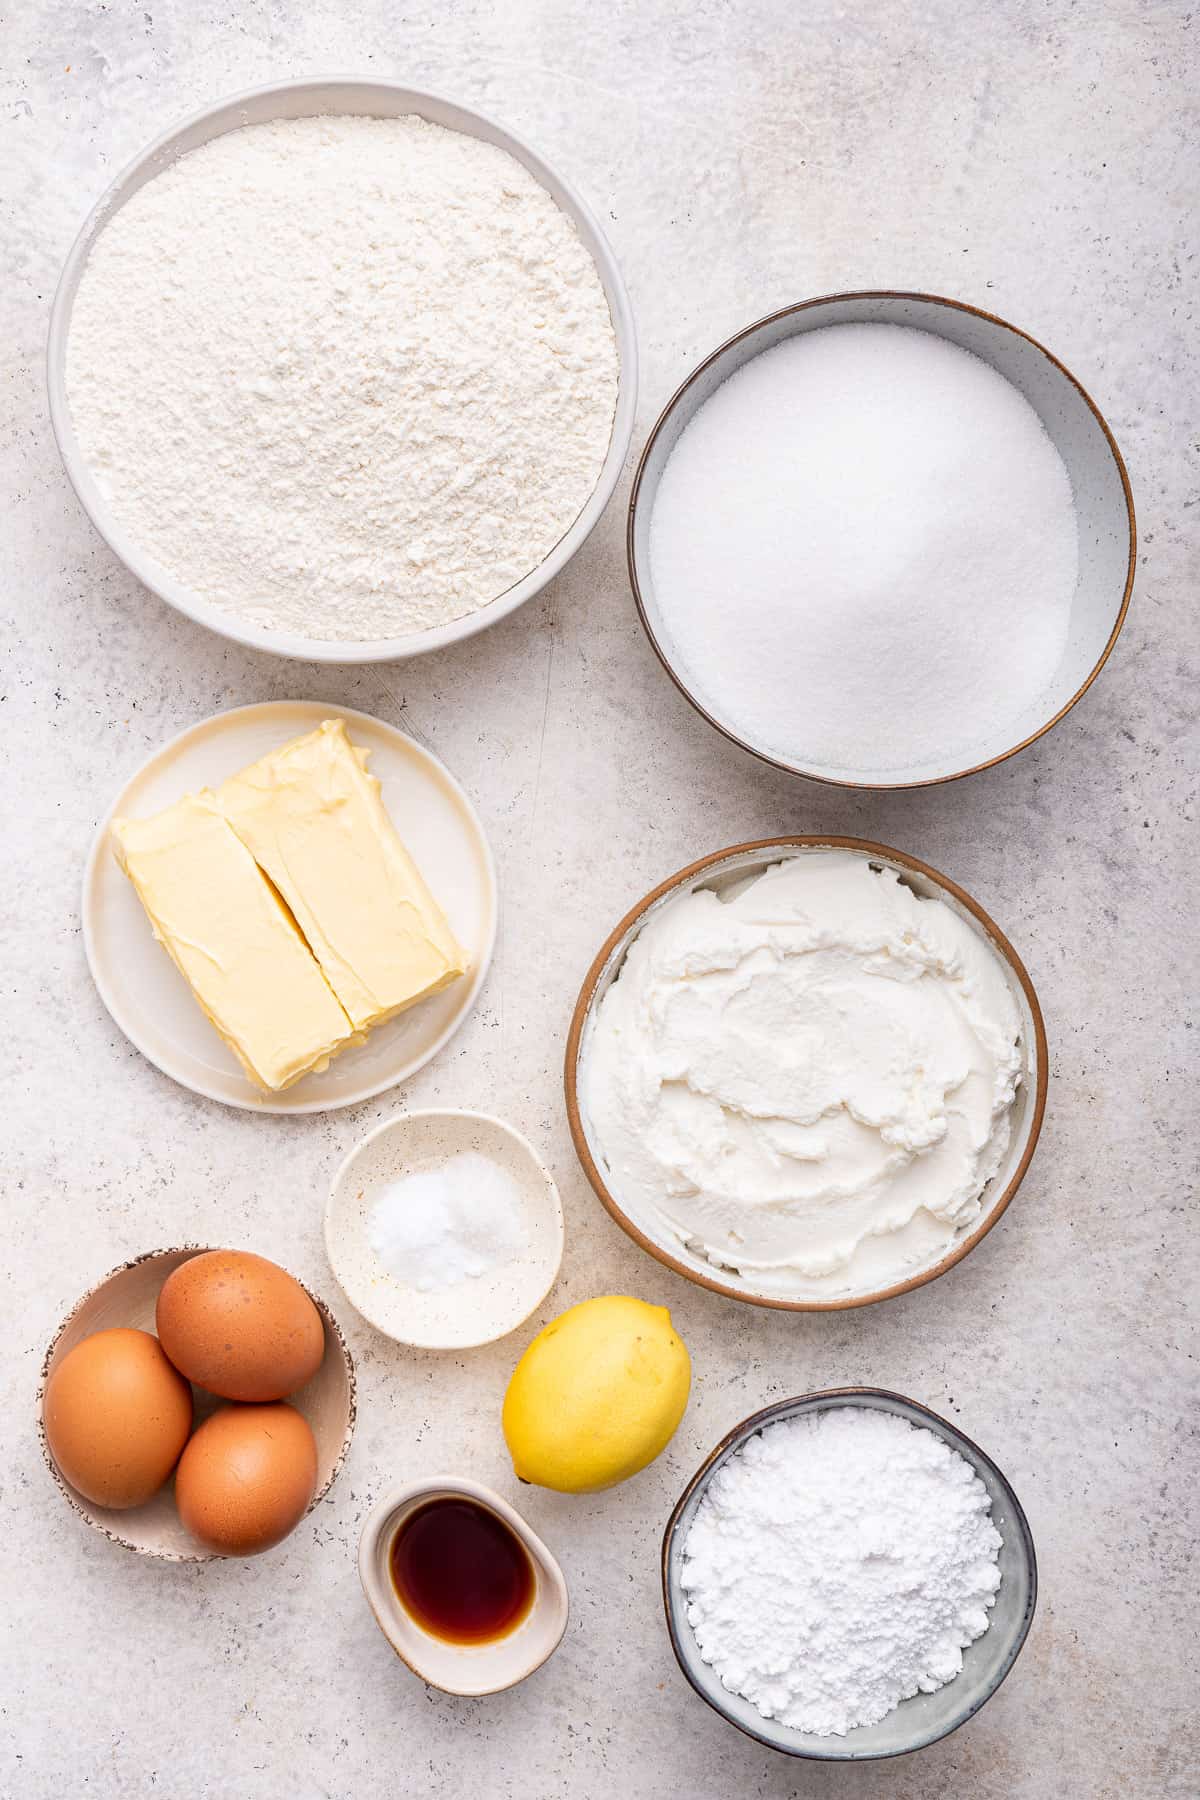 Ingredients for the lemon ricotta cookies on a grey background.